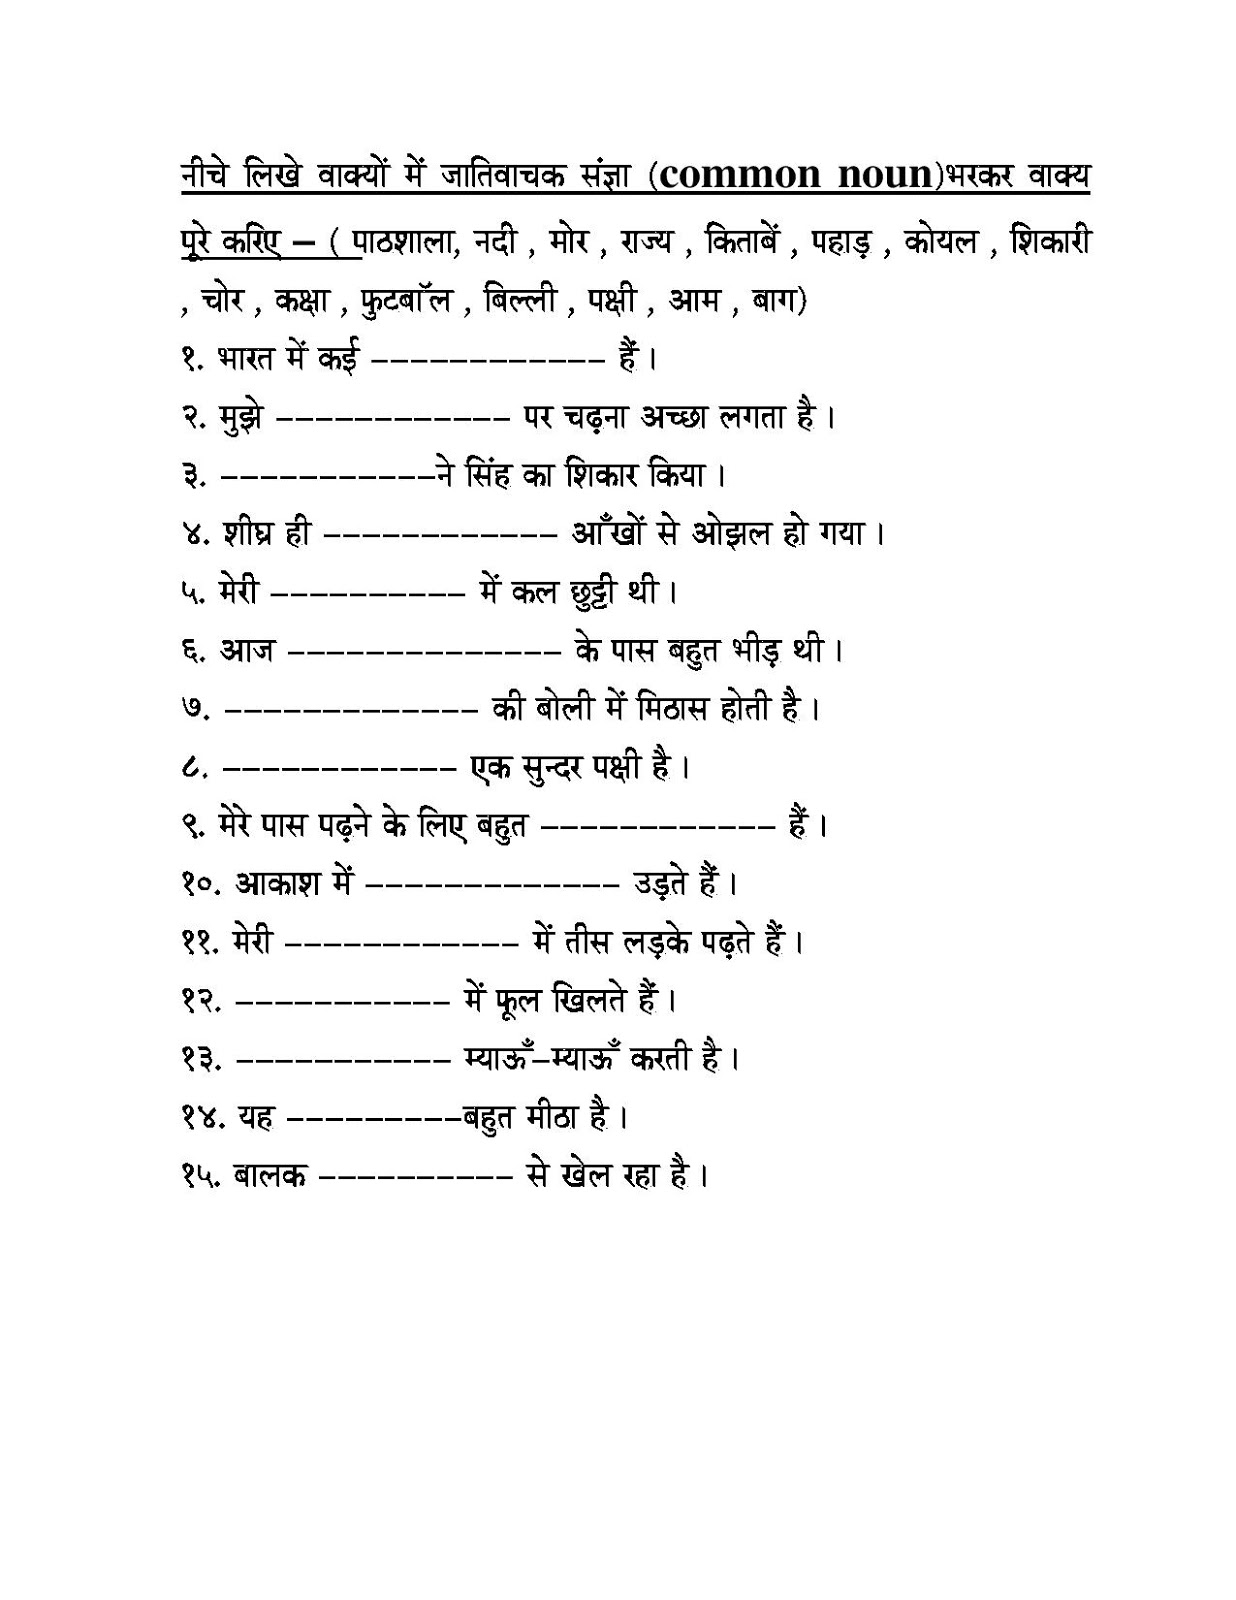 5th-grade-hindi-grammar-worksheets-for-class-5-with-answers-tutore-org-master-of-documents